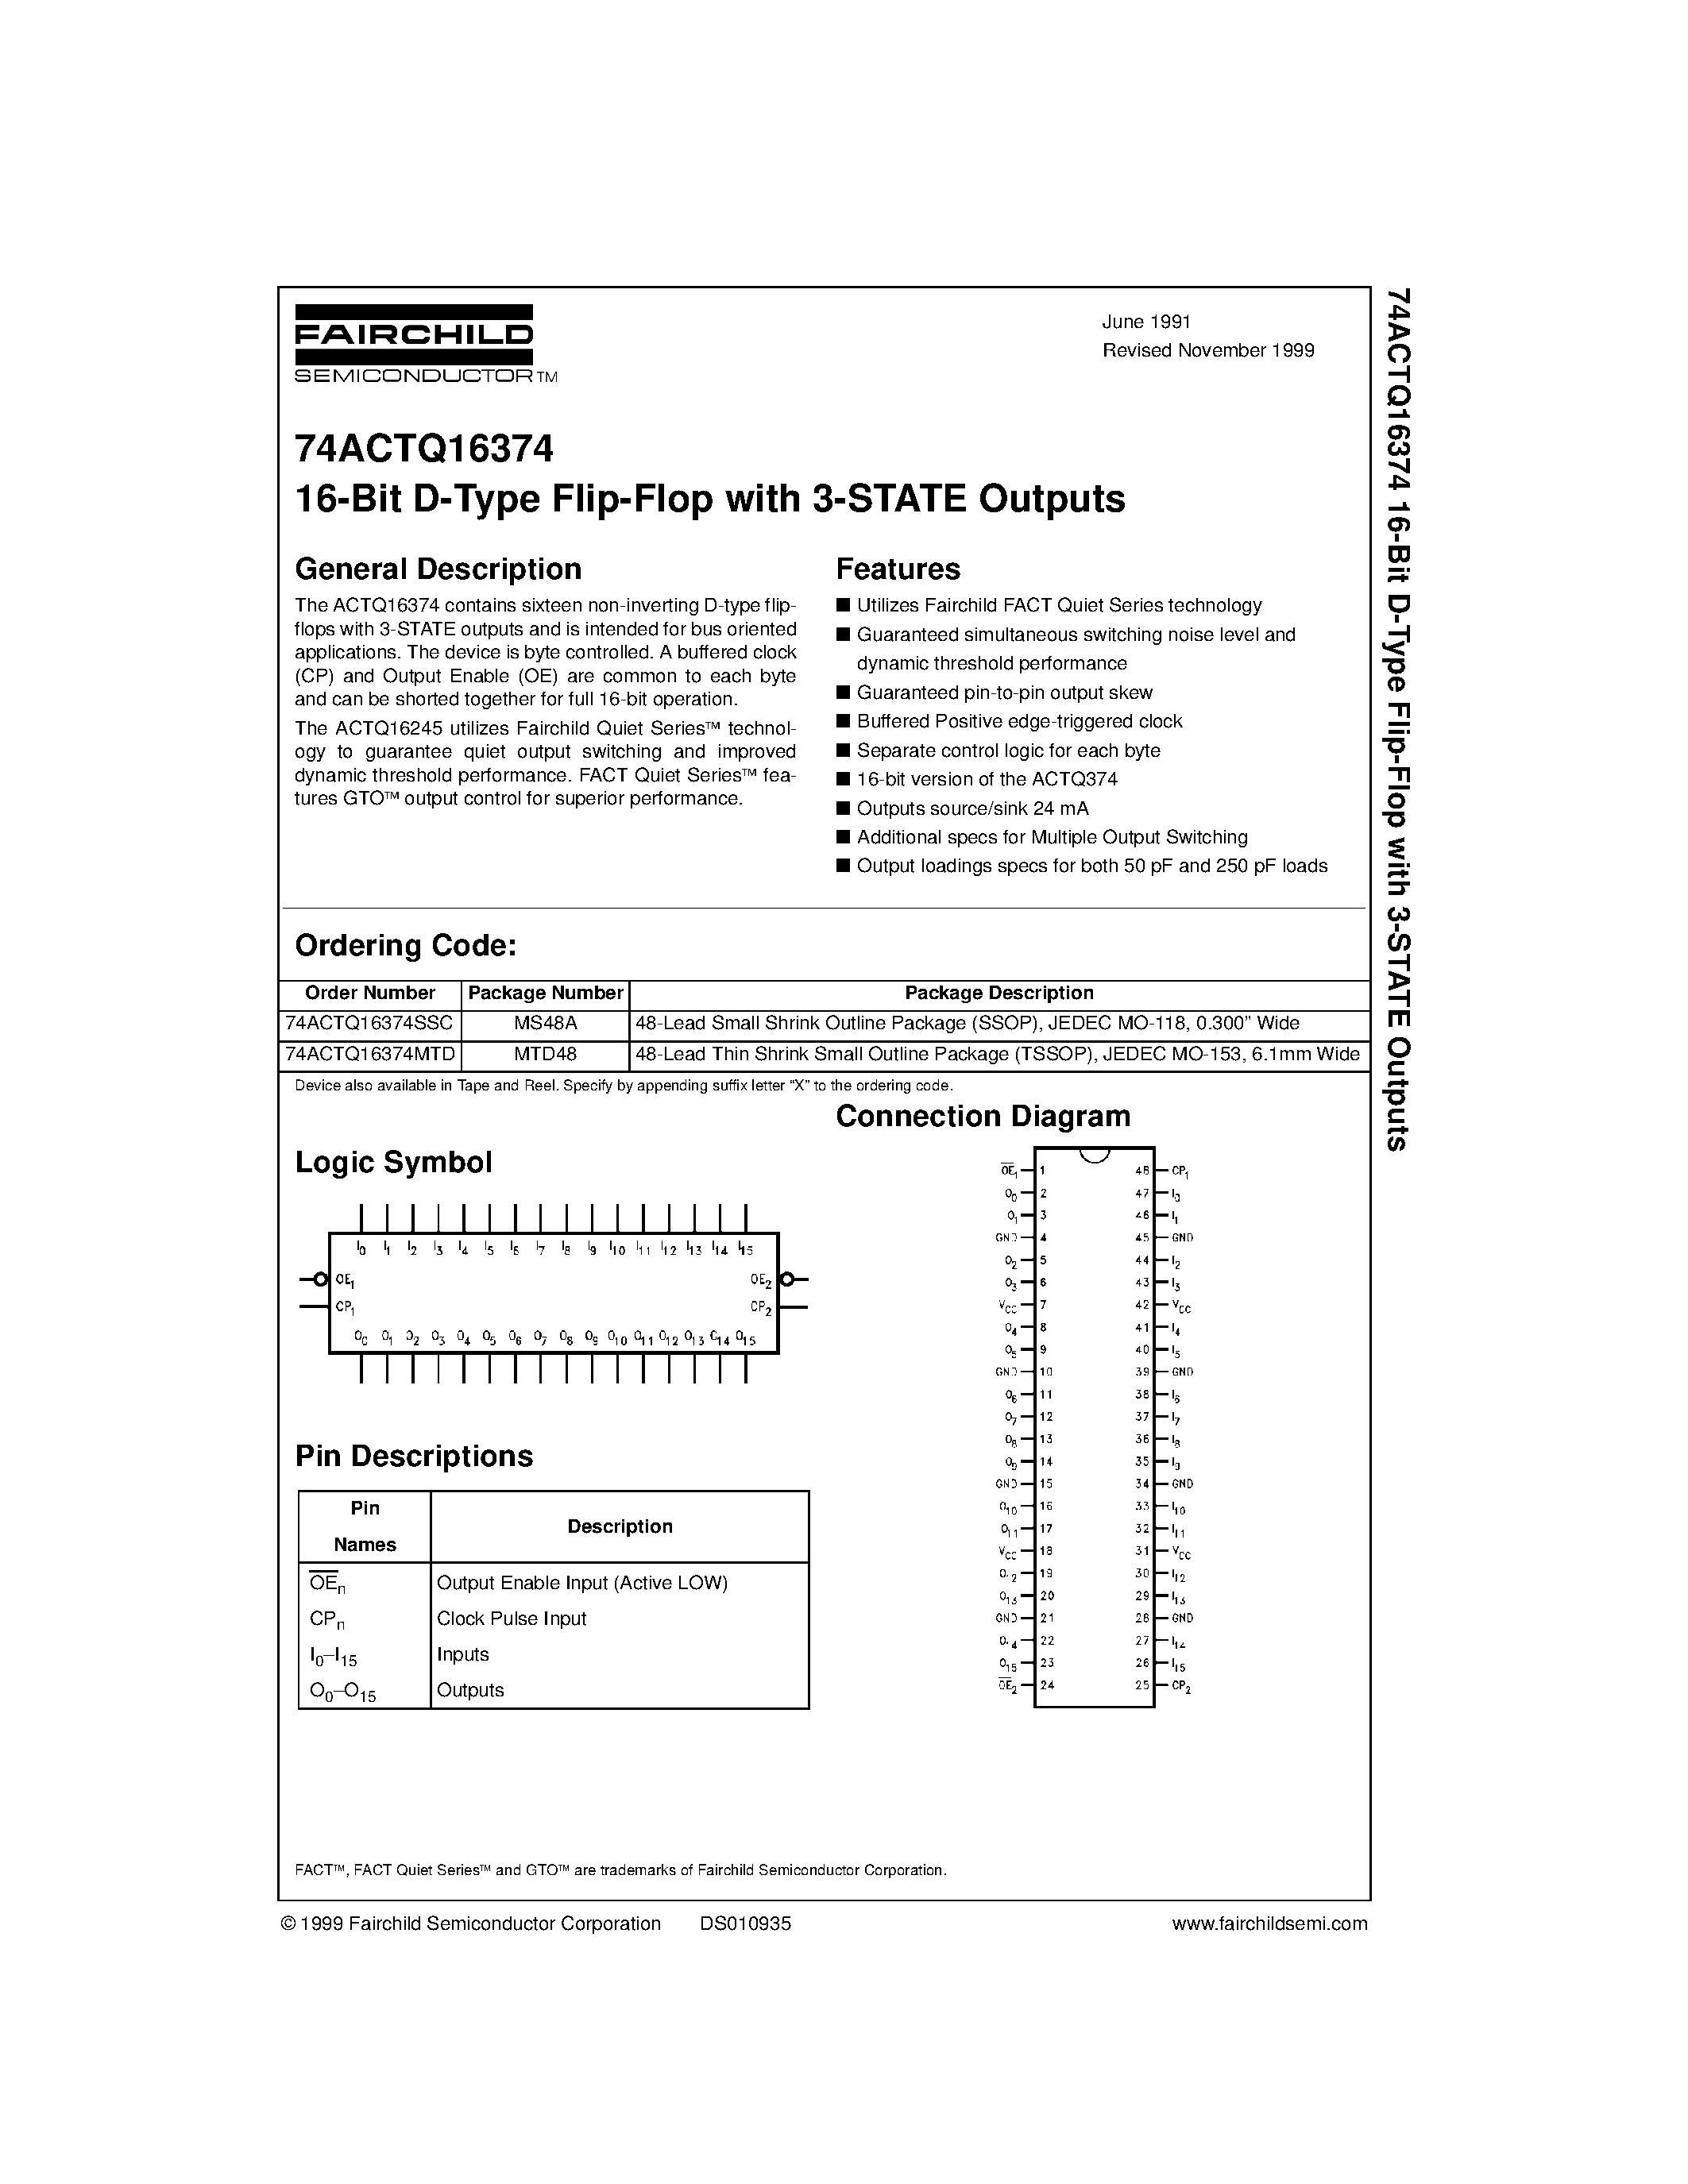 Datasheet 74ACTQ16374 - 16-Bit D-Type Flip-Flop with 3-STATE Outputs page 1